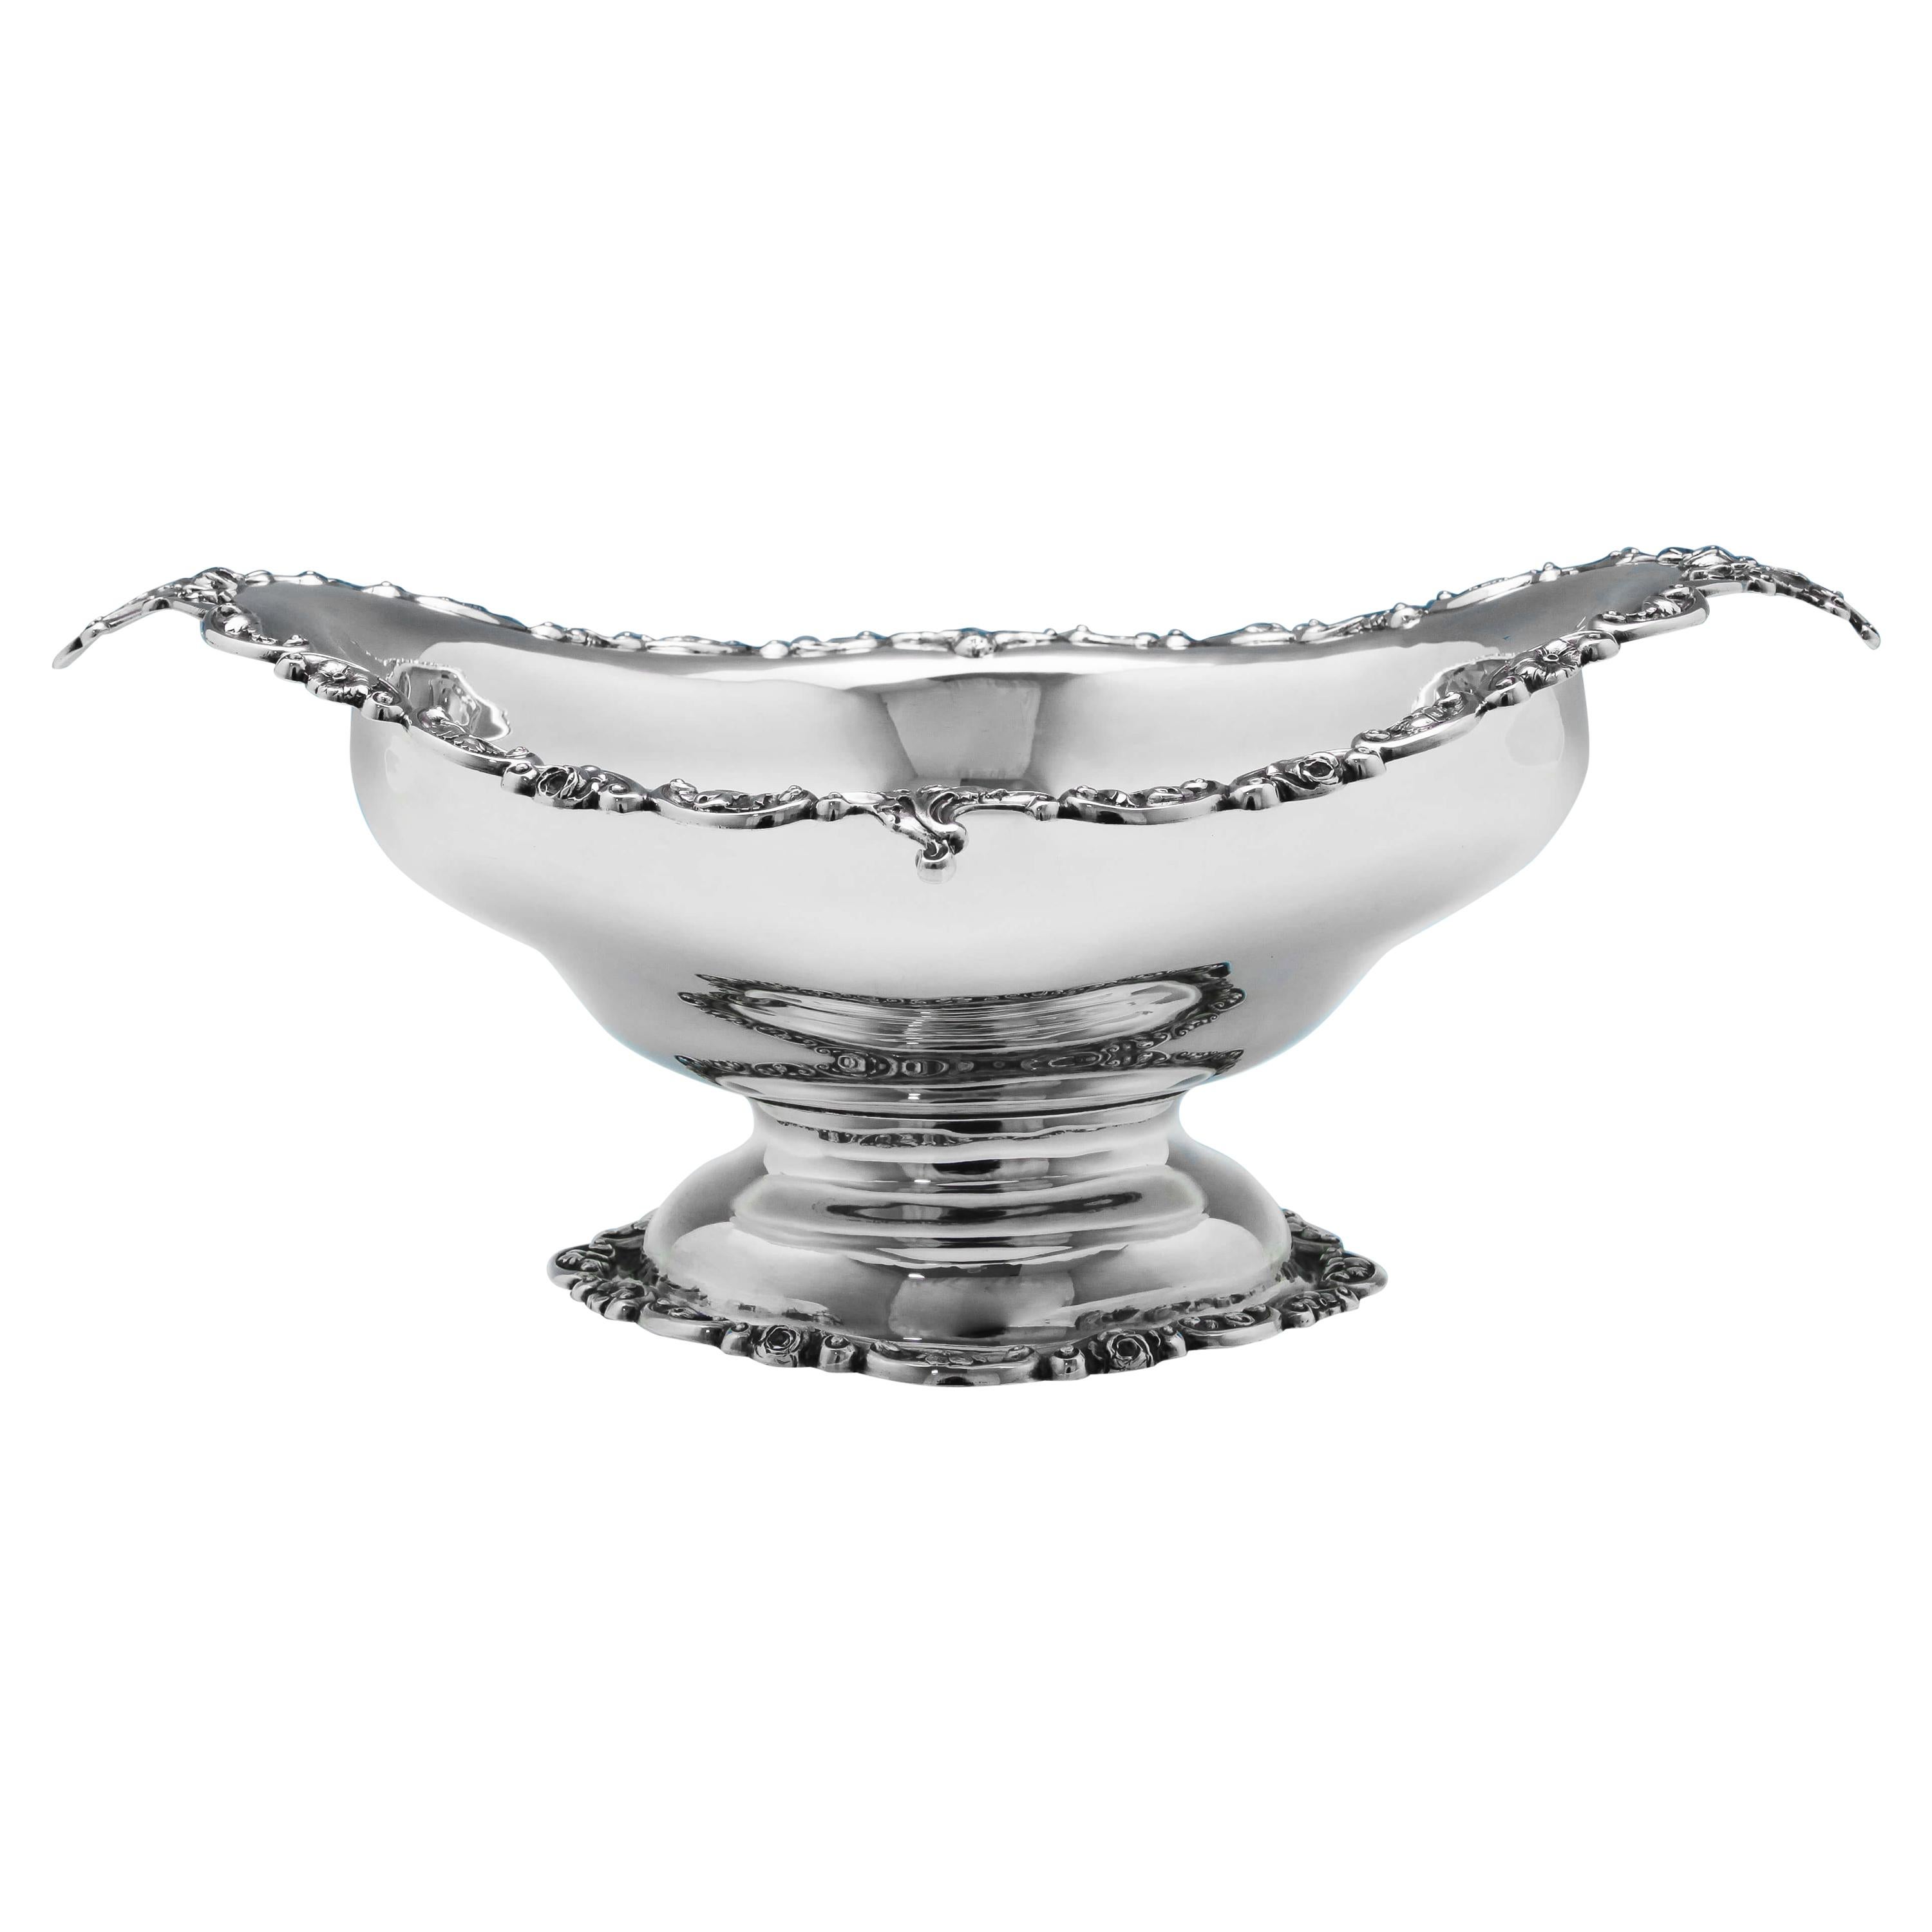 Edwardian Sterling Silver Bowl Hallmarked in 1909 by C. C. Pilling